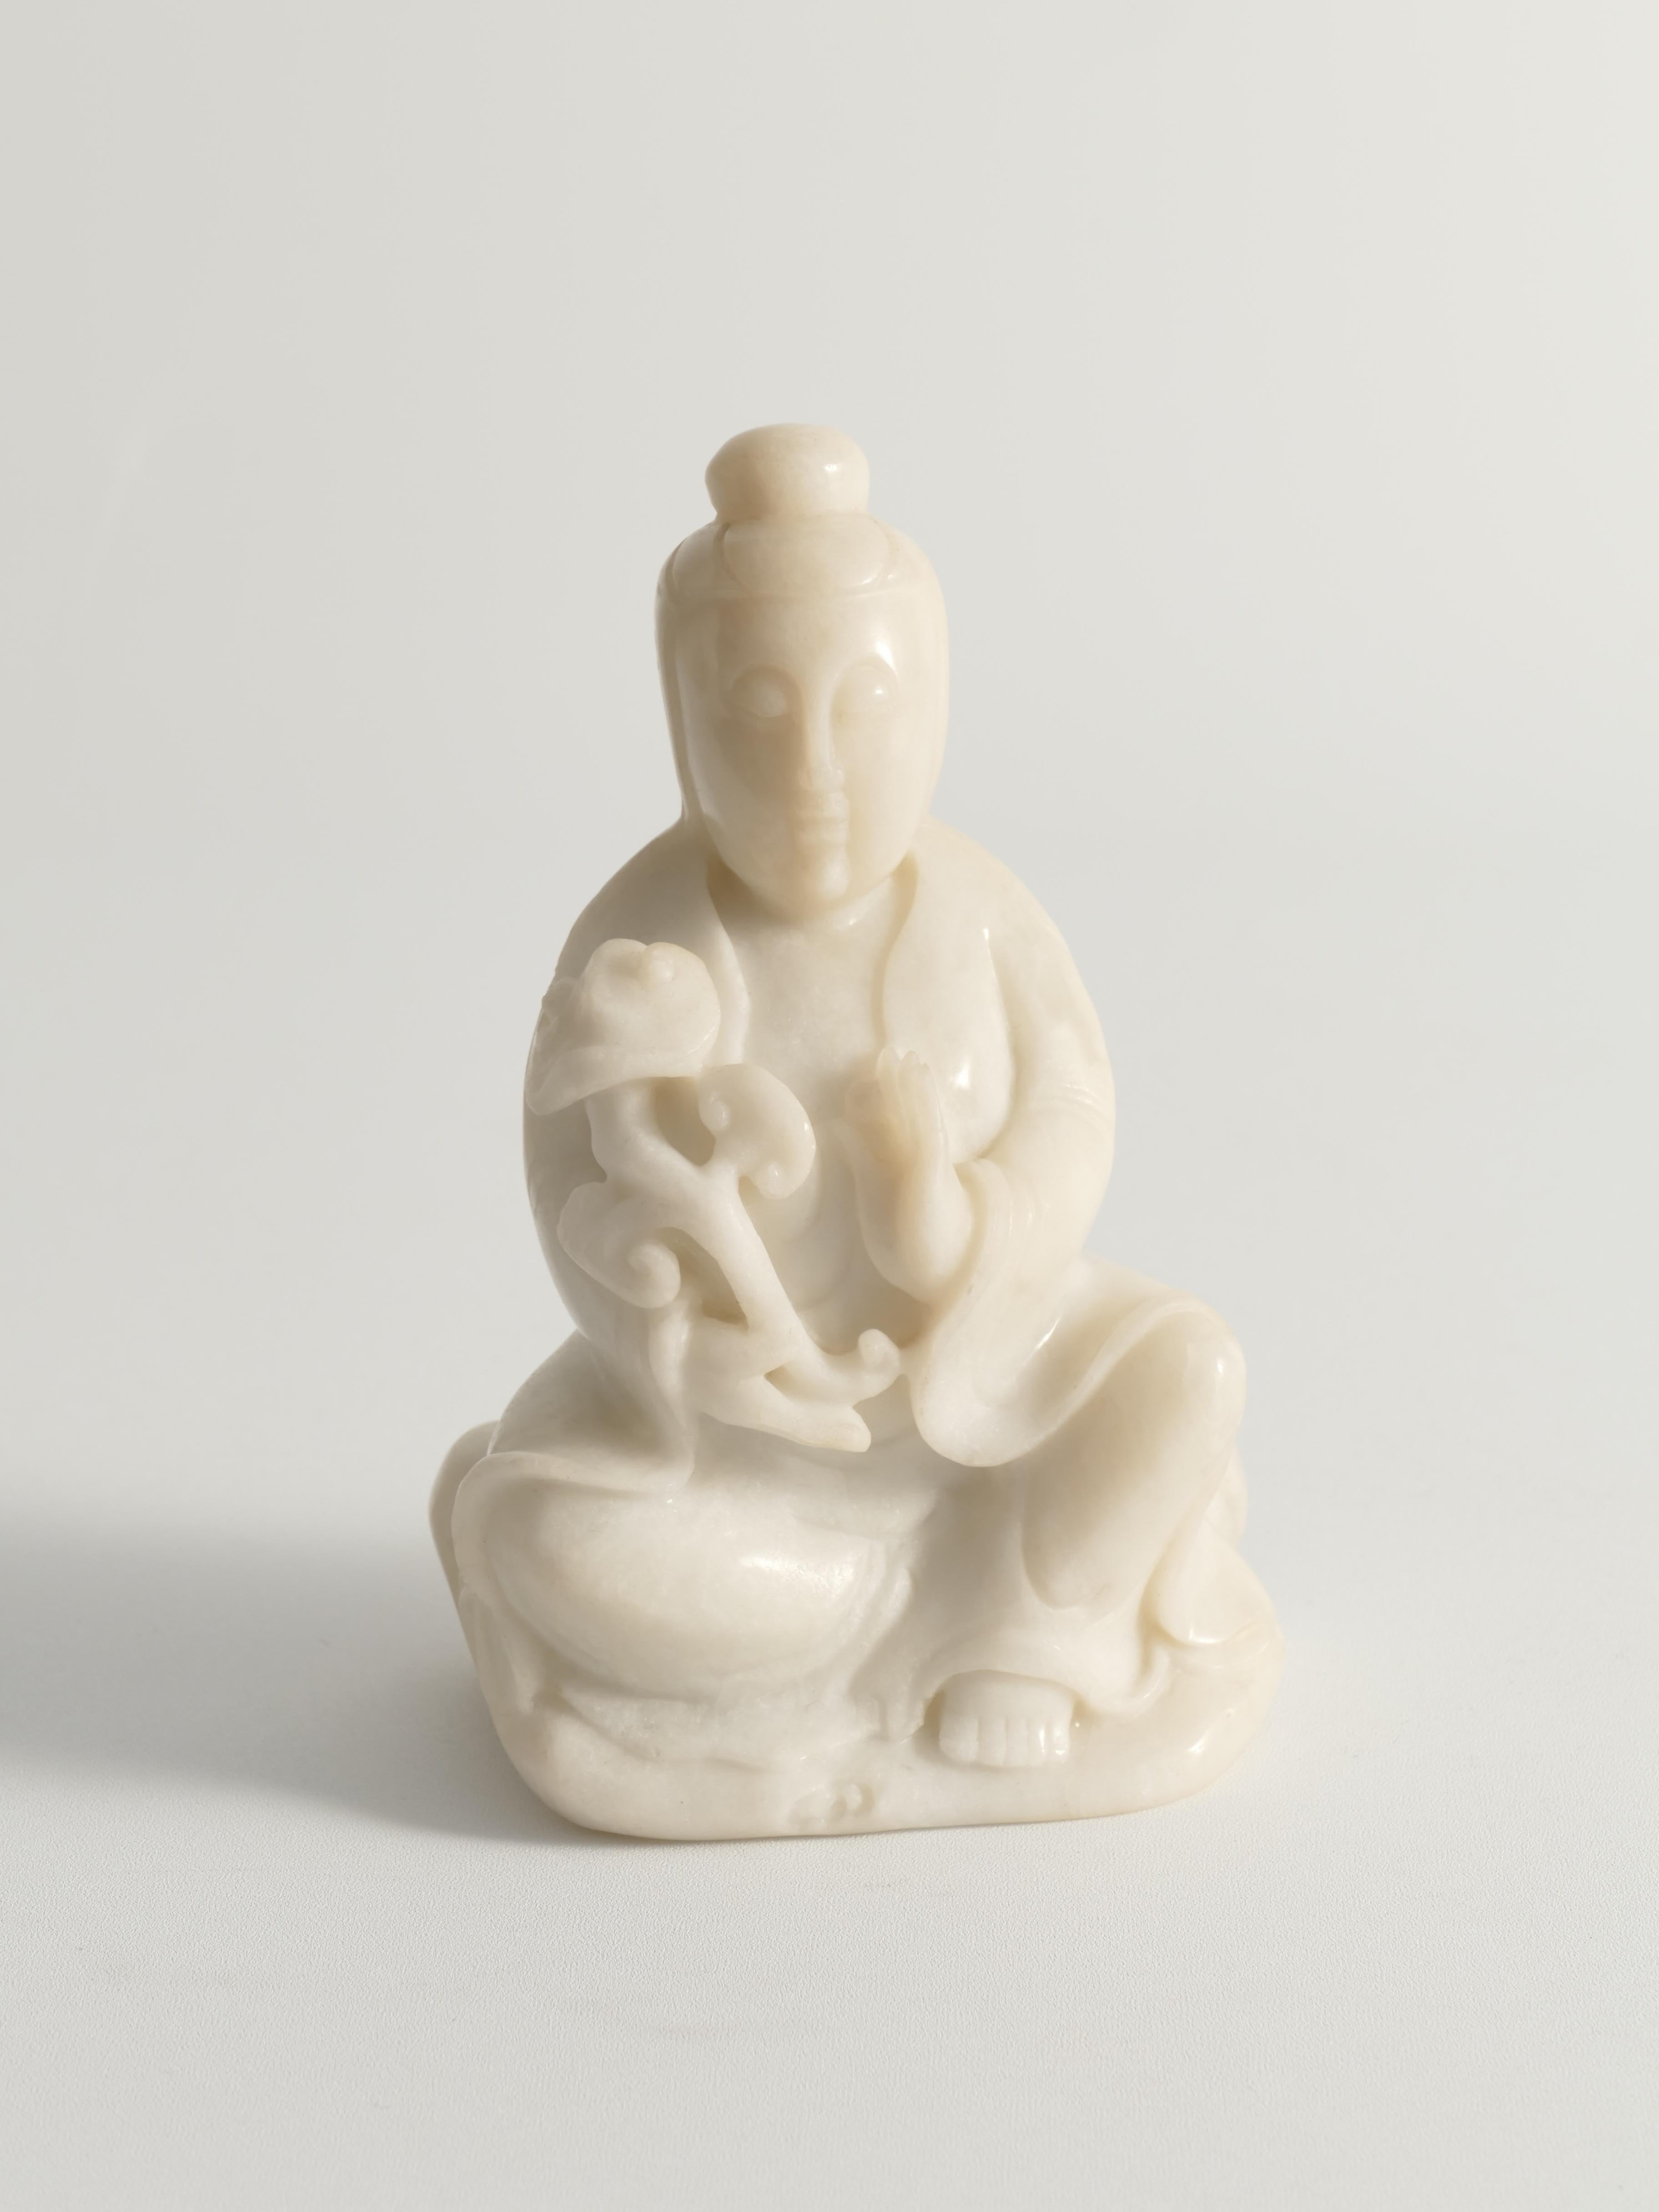 This exquisite figure of Guanyin from early 20th century is masterfully carved from a single piece of pure, delicate white alabaster. The alabaster, known for its firm yet warm quality, lends a serene and ethereal beauty to the figure. Guanyin's